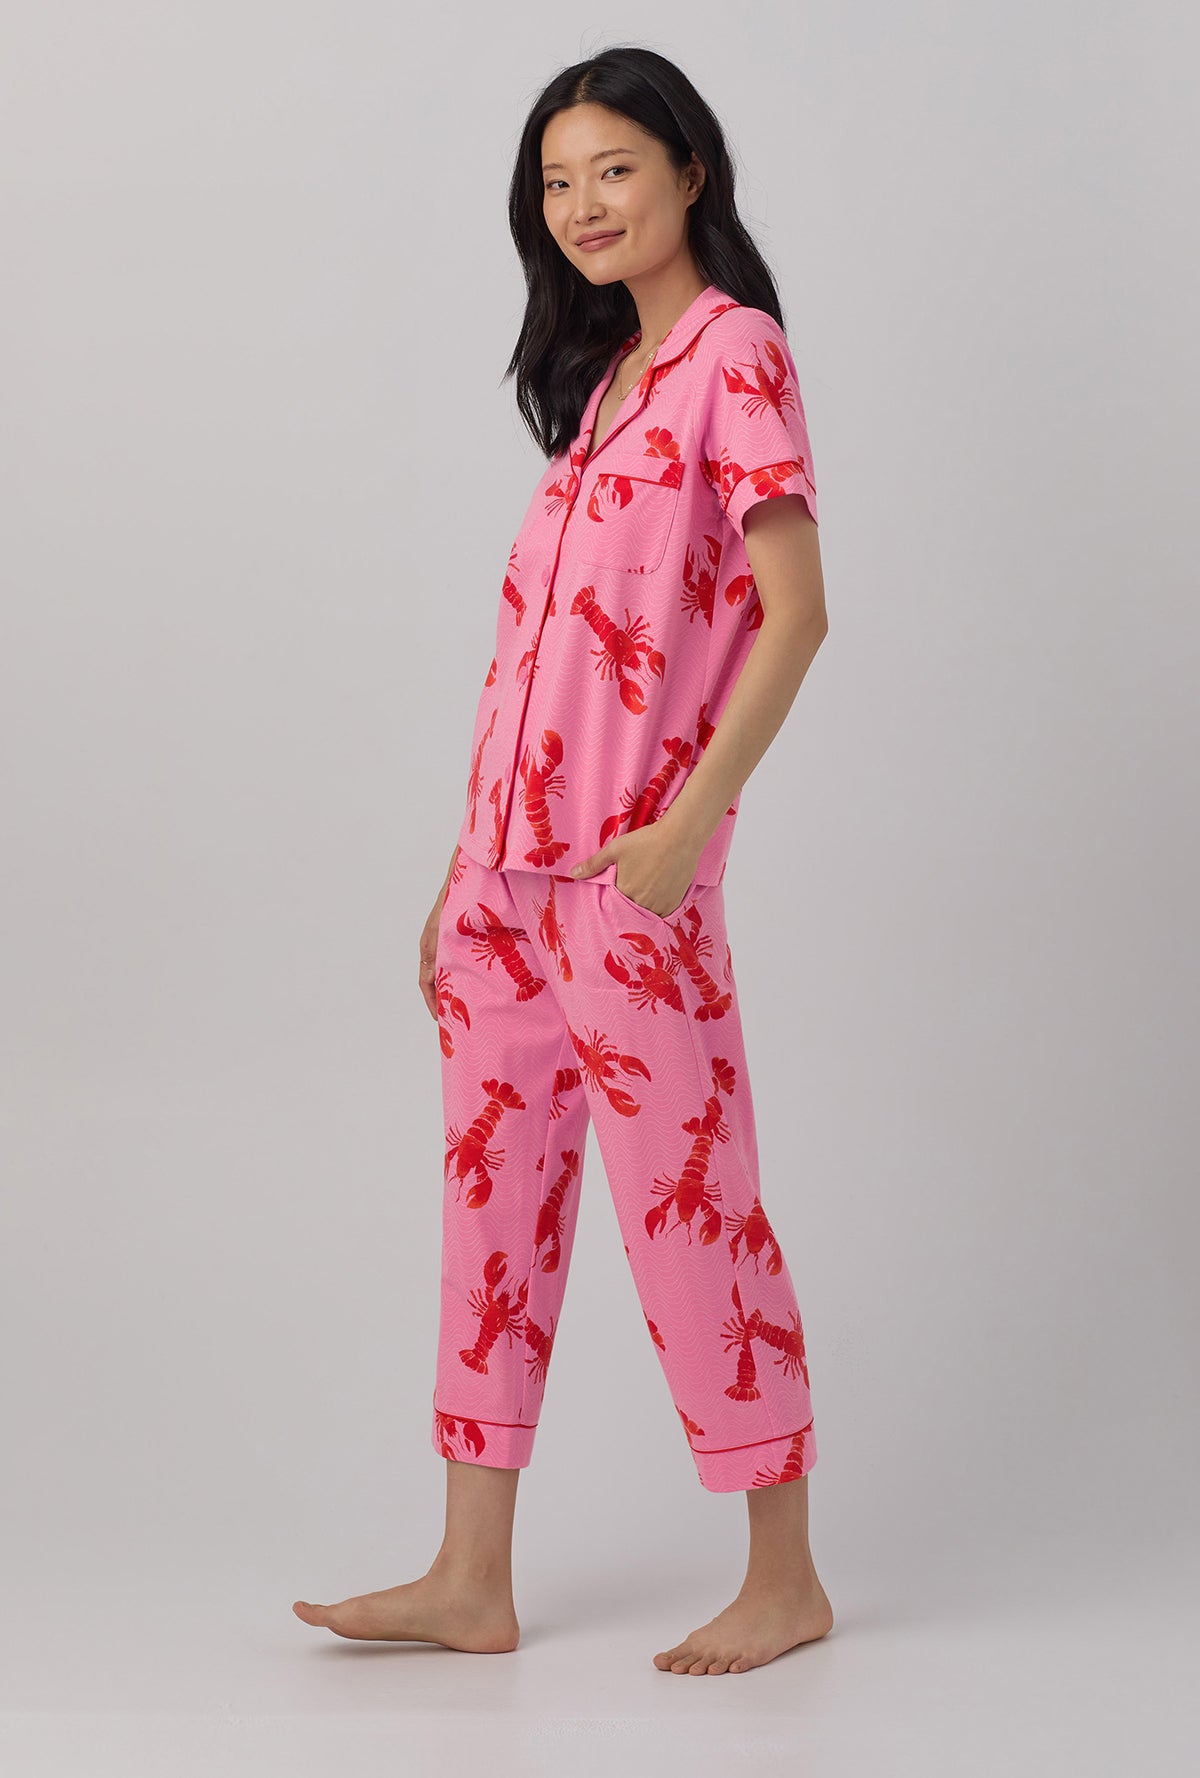 A lady wearing  pink  Short Sleeve Classic Stretch Jersey Cropped PJ Set with Lobster Fest print.